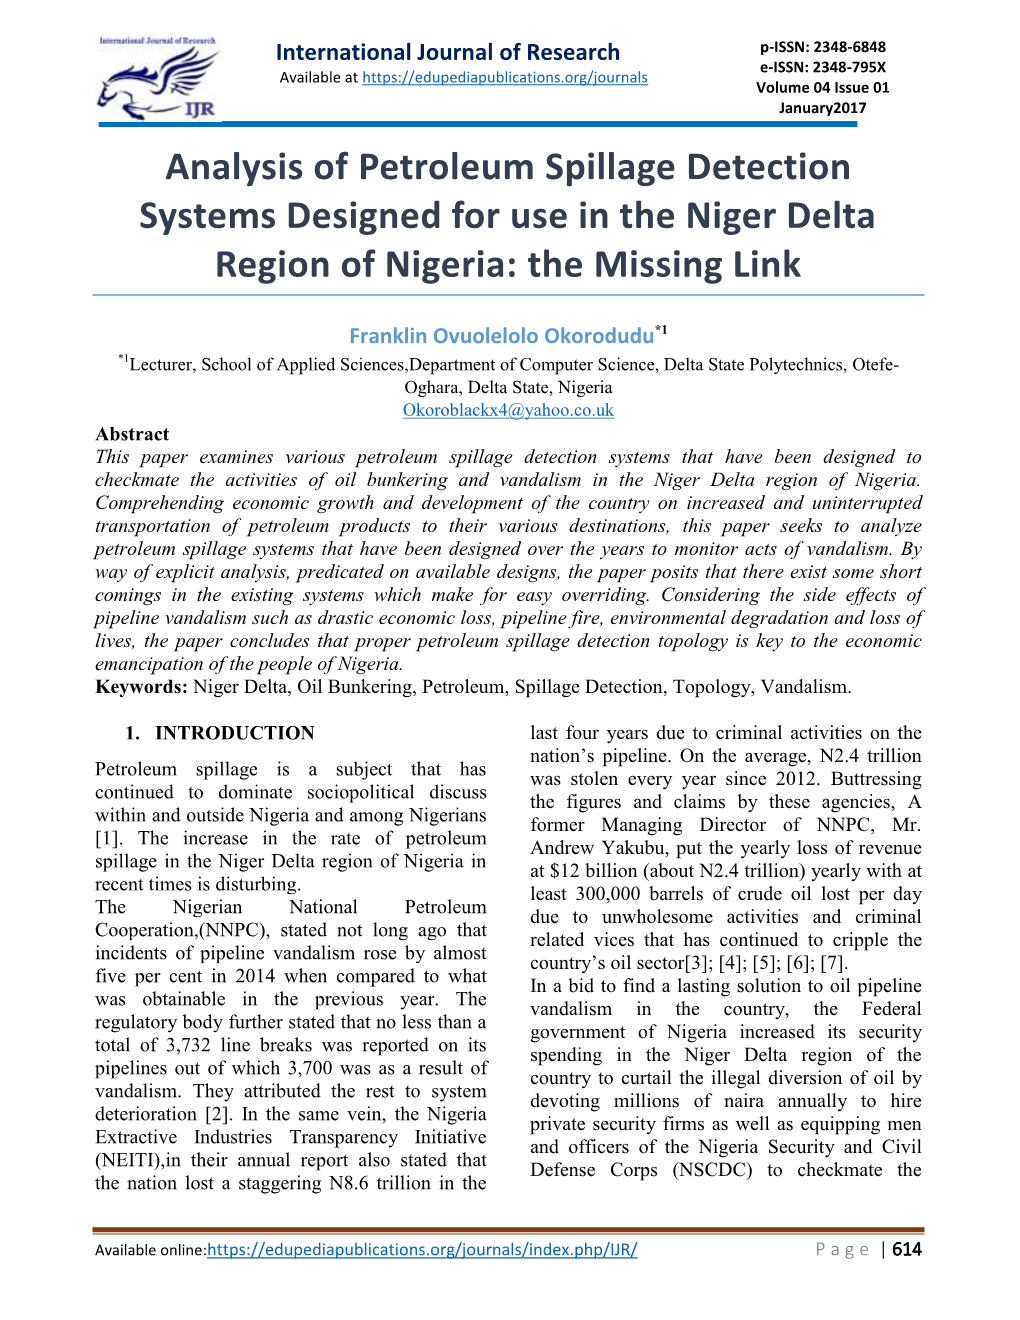 Analysis of Petroleum Spillage Detection Systems Designed for Use in the Niger Delta Region of Nigeria: the Missing Link